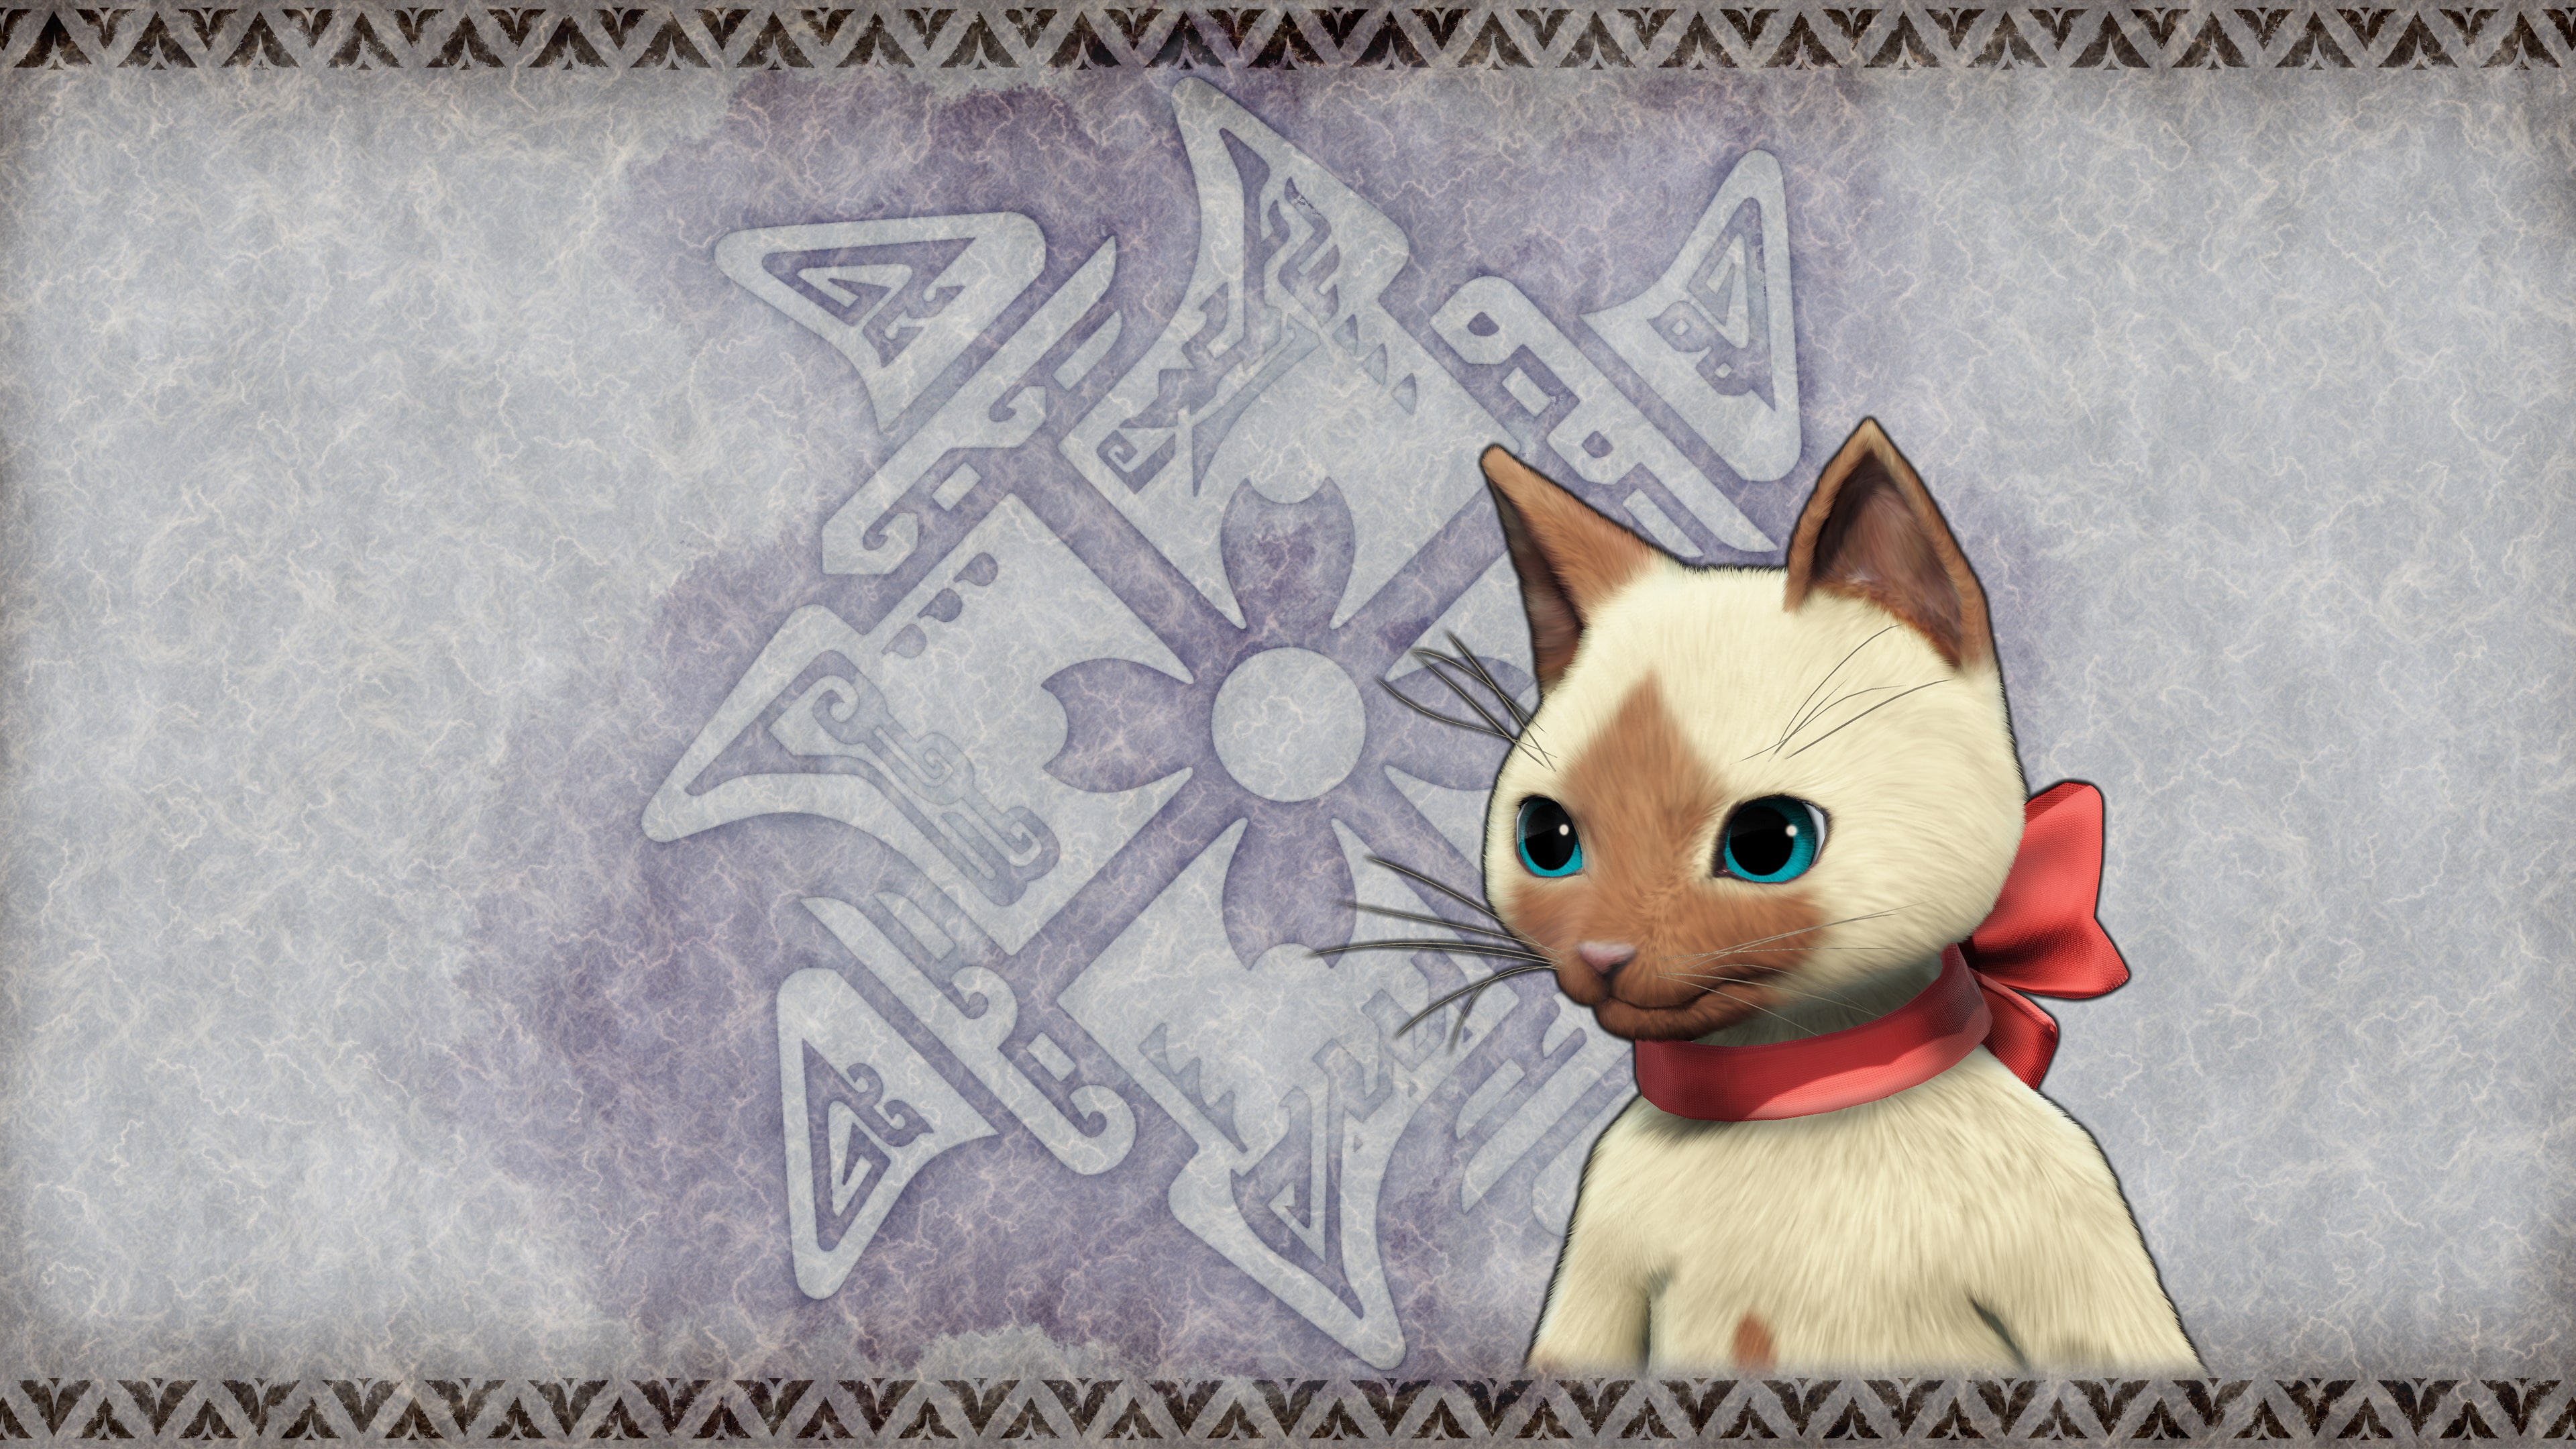 Monster Hunter Rise - "Bow Collar" Palico layered armor piece